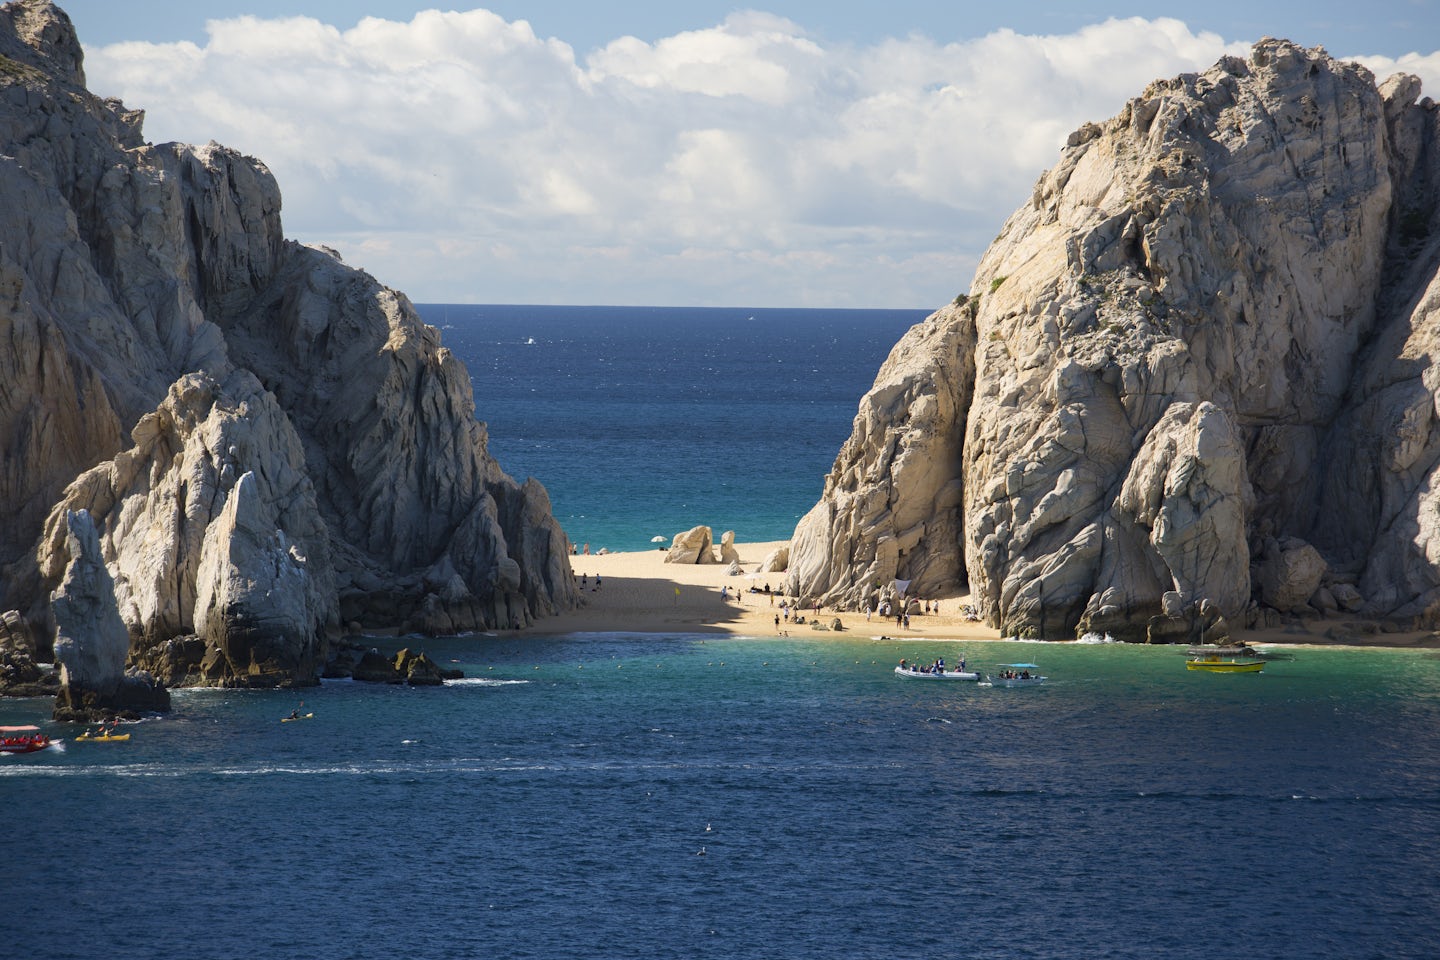 View of Lovers Beach, Cabo San Lucas, Mexico from our balcony